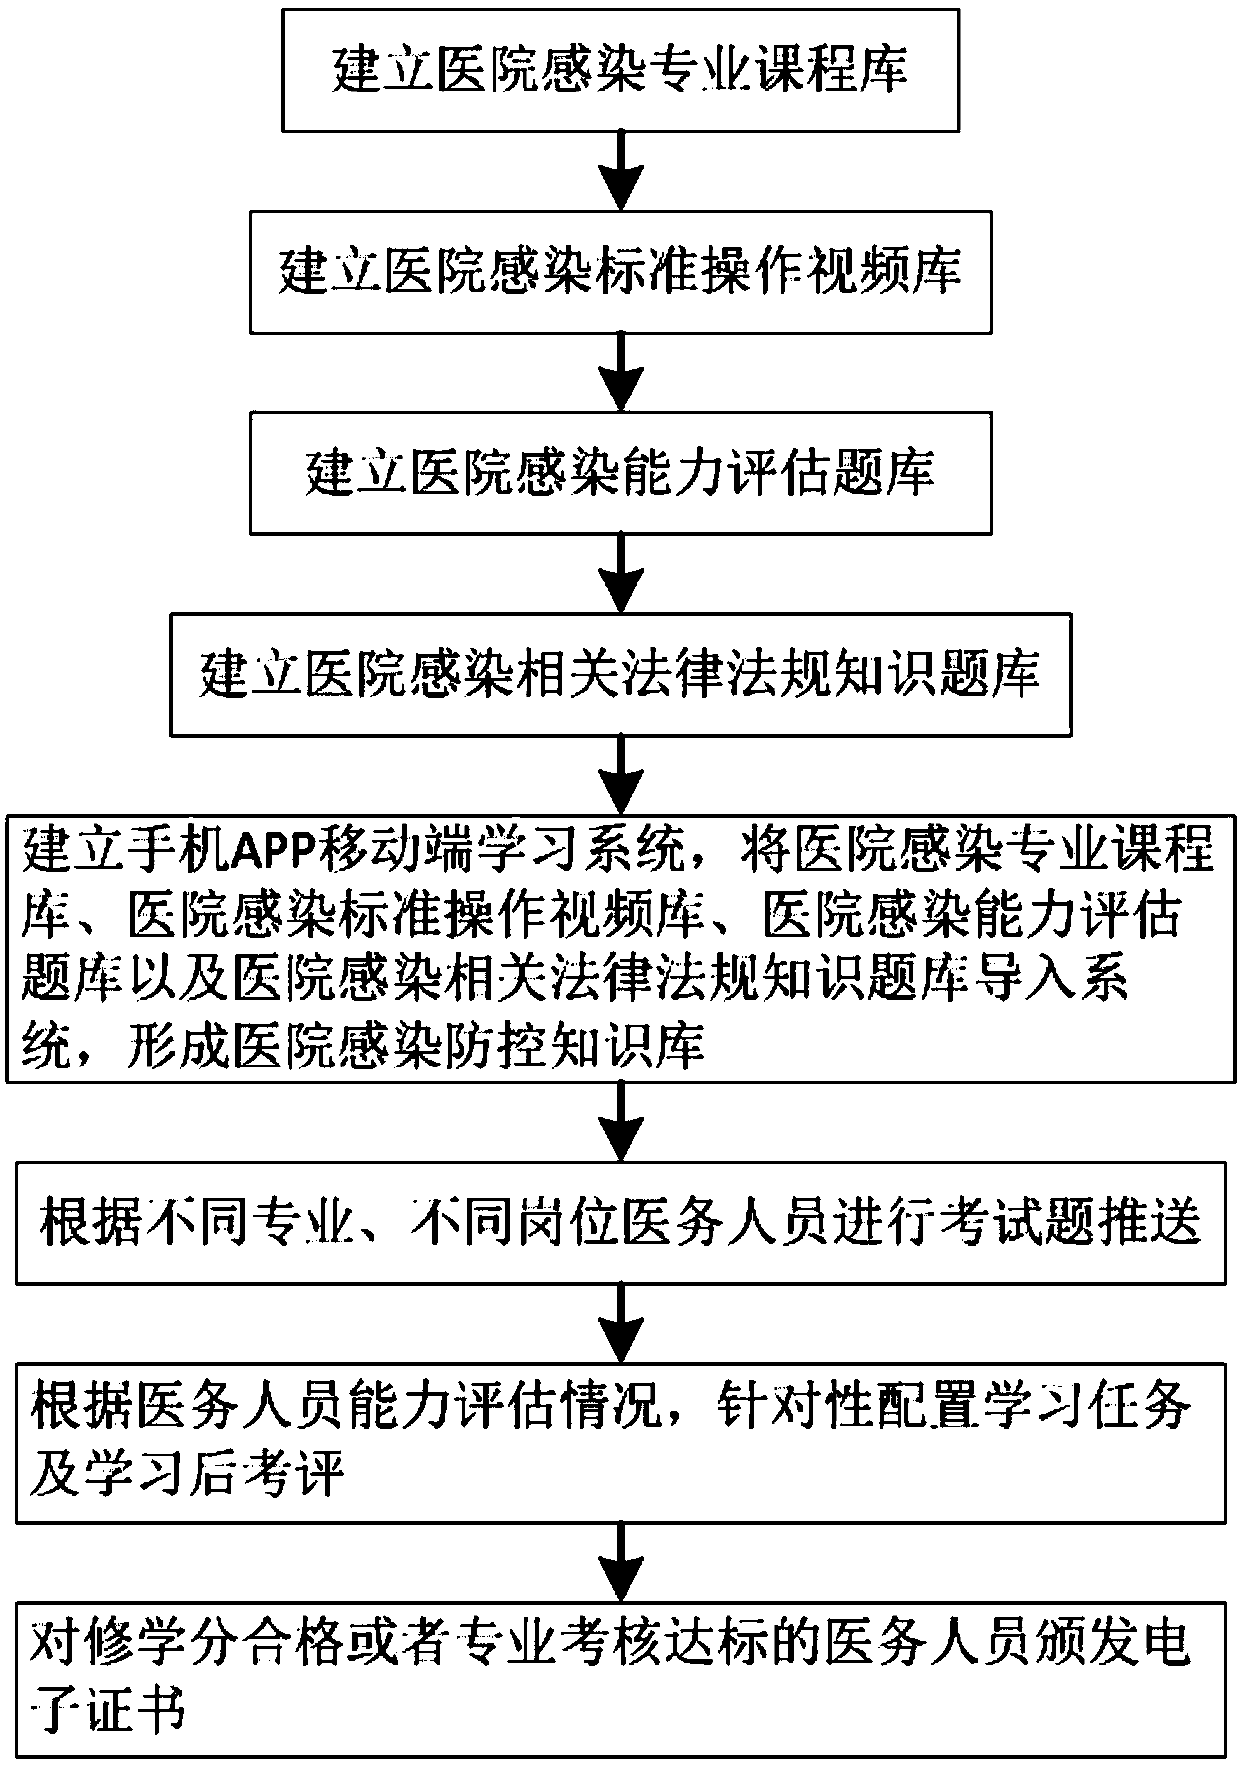 System and method for prevention and control learning of hospital infection by medical staff